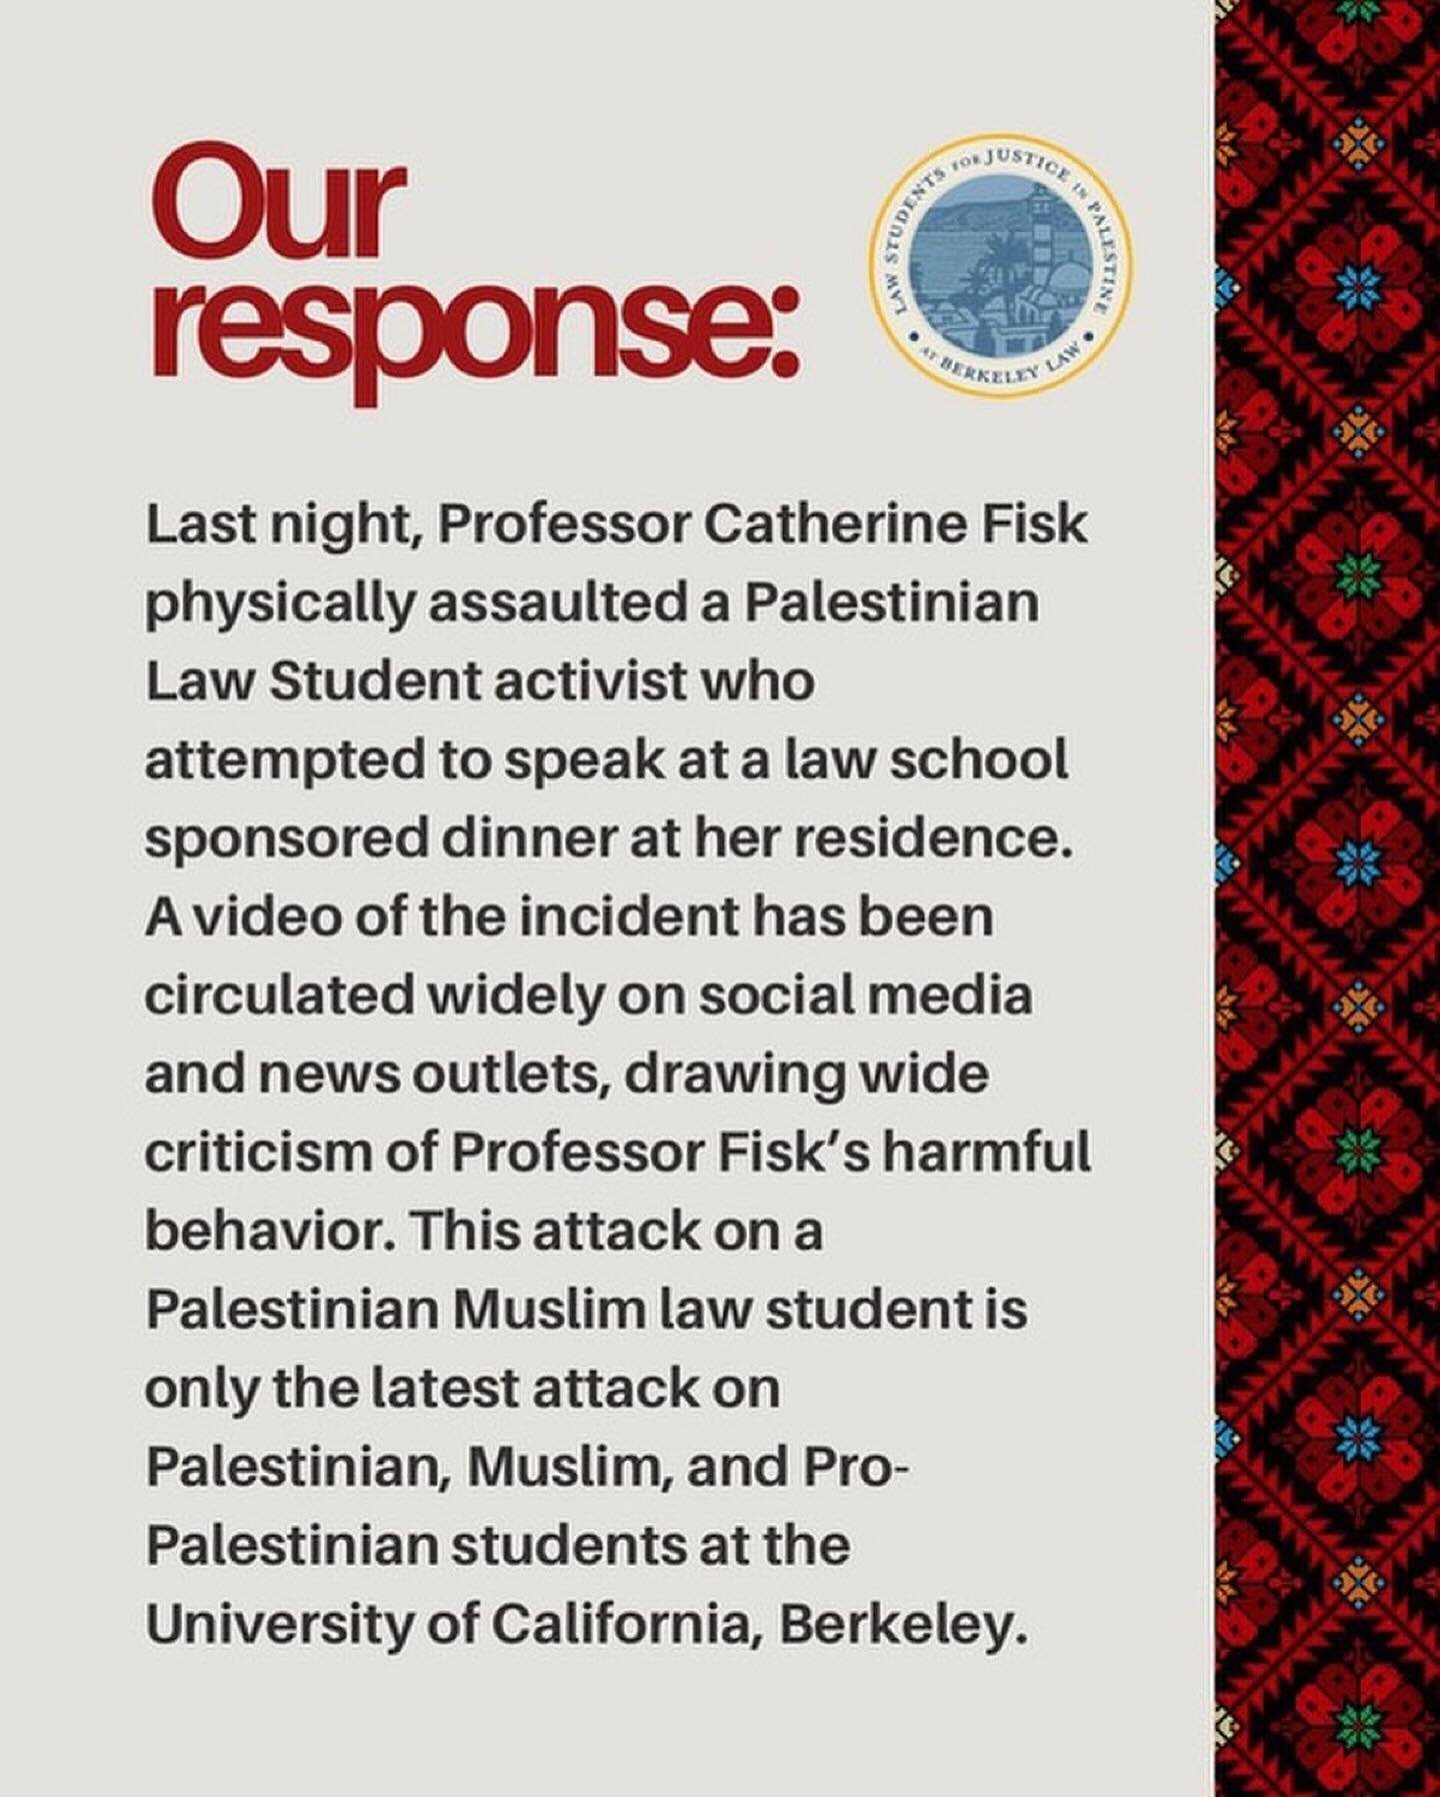 To everyone asking &ldquo;what can we do?&rdquo; after watching the horrendous video of UC Berkeley professor Catherine Fisk assaulting a Palestinian student, here&rsquo;s a clear call to action and a list of demands from Cal student organizers. Take